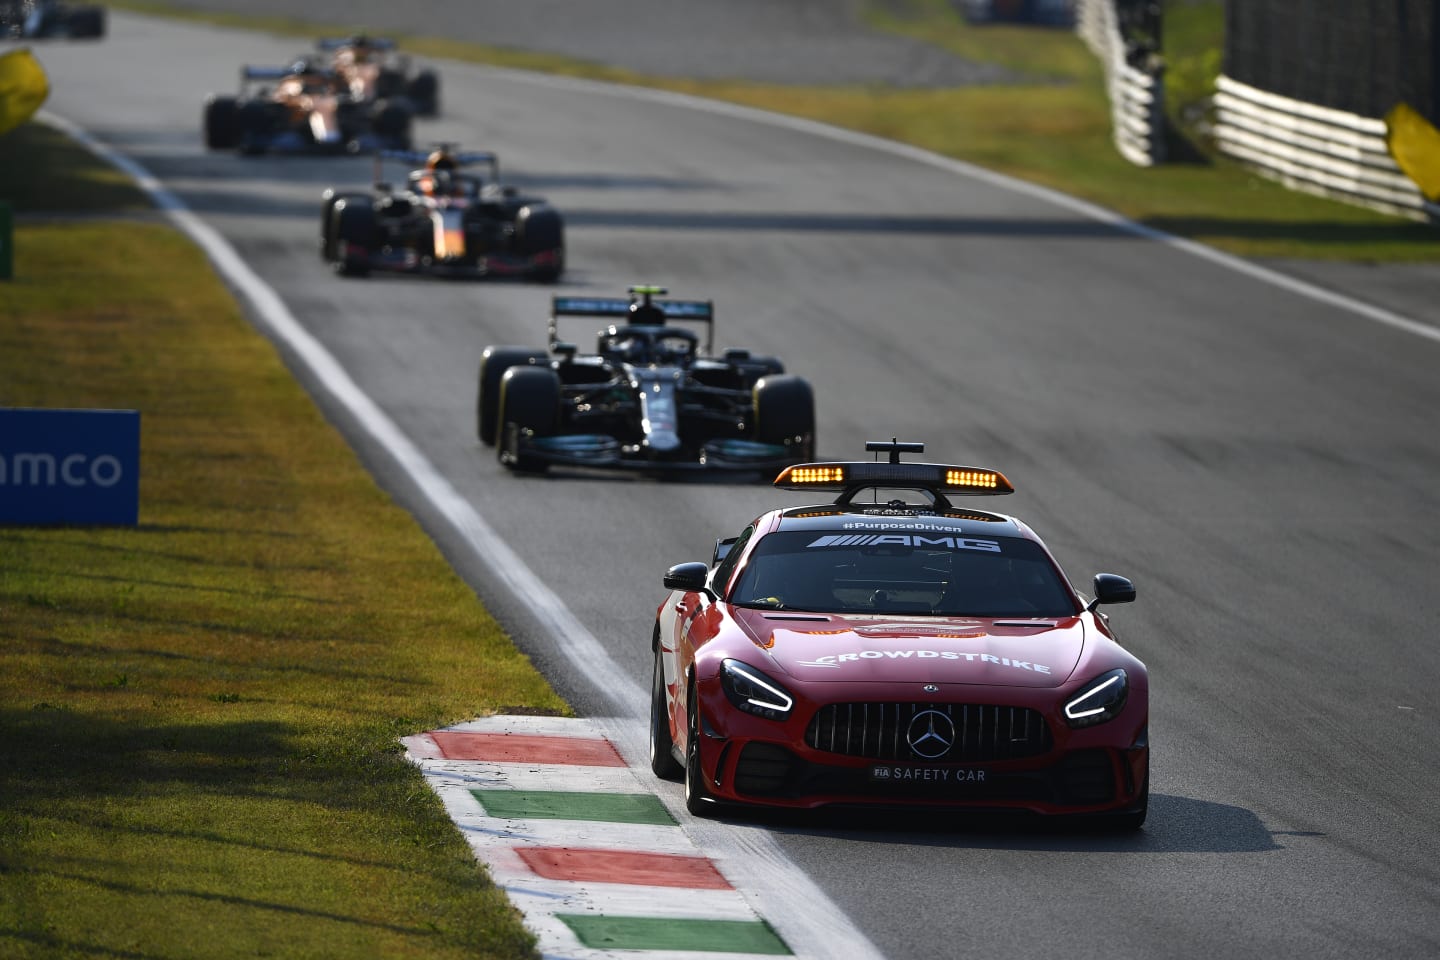 MONZA, ITALY - SEPTEMBER 11: The FIA Safety Car leads the field during the Sprint ahead of the F1